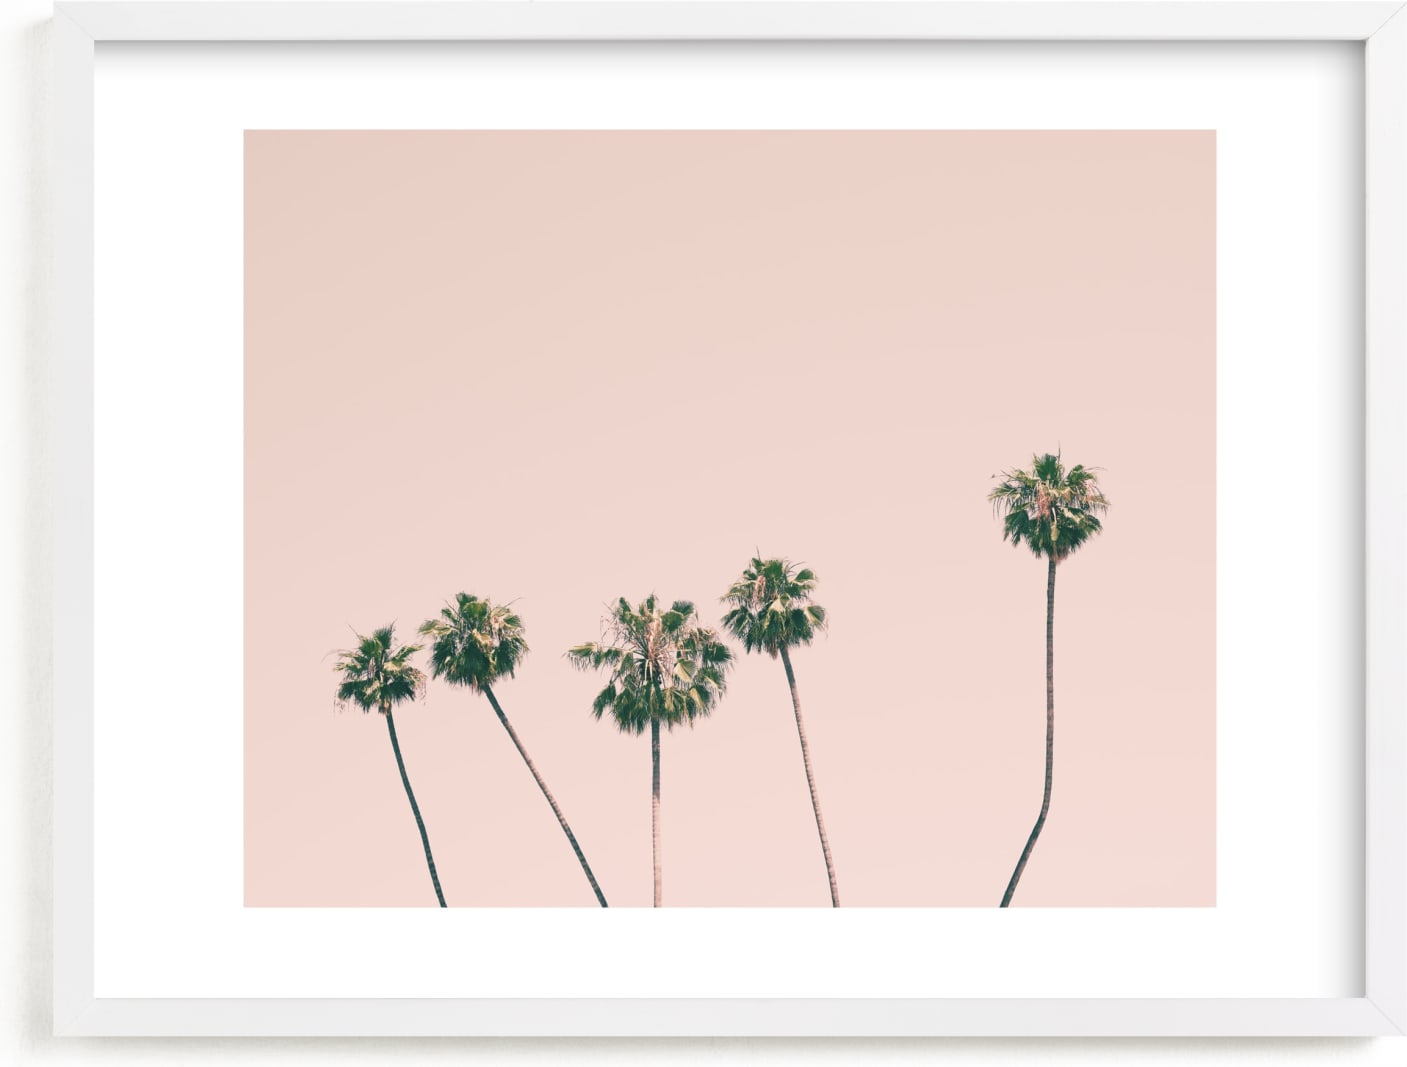 This is a pink kids wall art by Caroline Mint called Five.